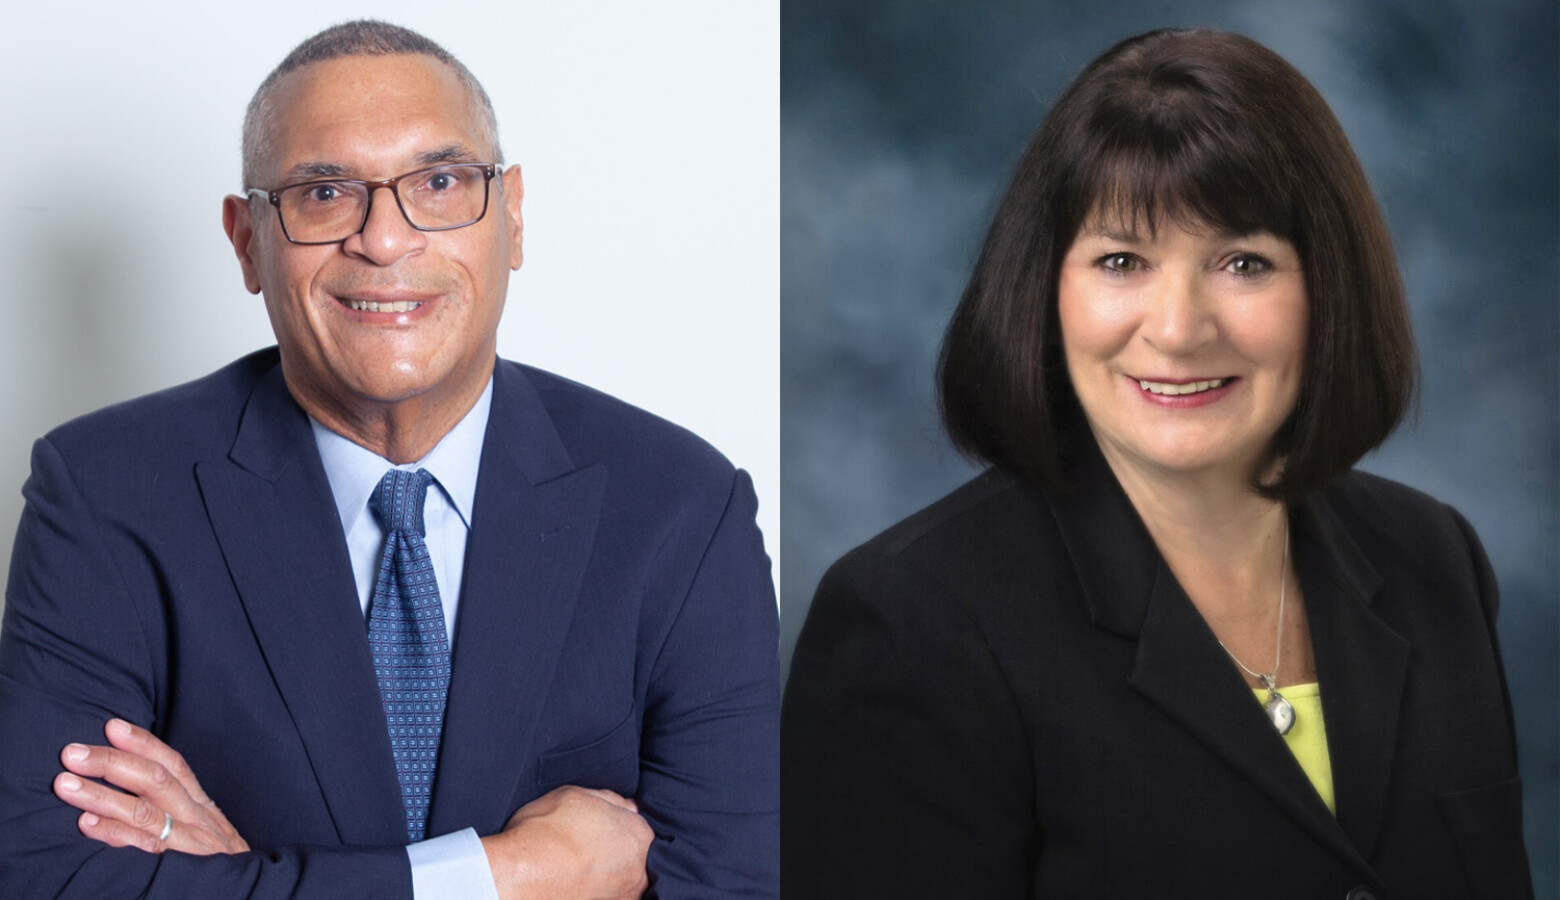 Democratic gubernatorial candidate Woody Myers, left, named former state Rep. Linda Lawson, right, as his running mate. (Courtesy of the Myers campaign)